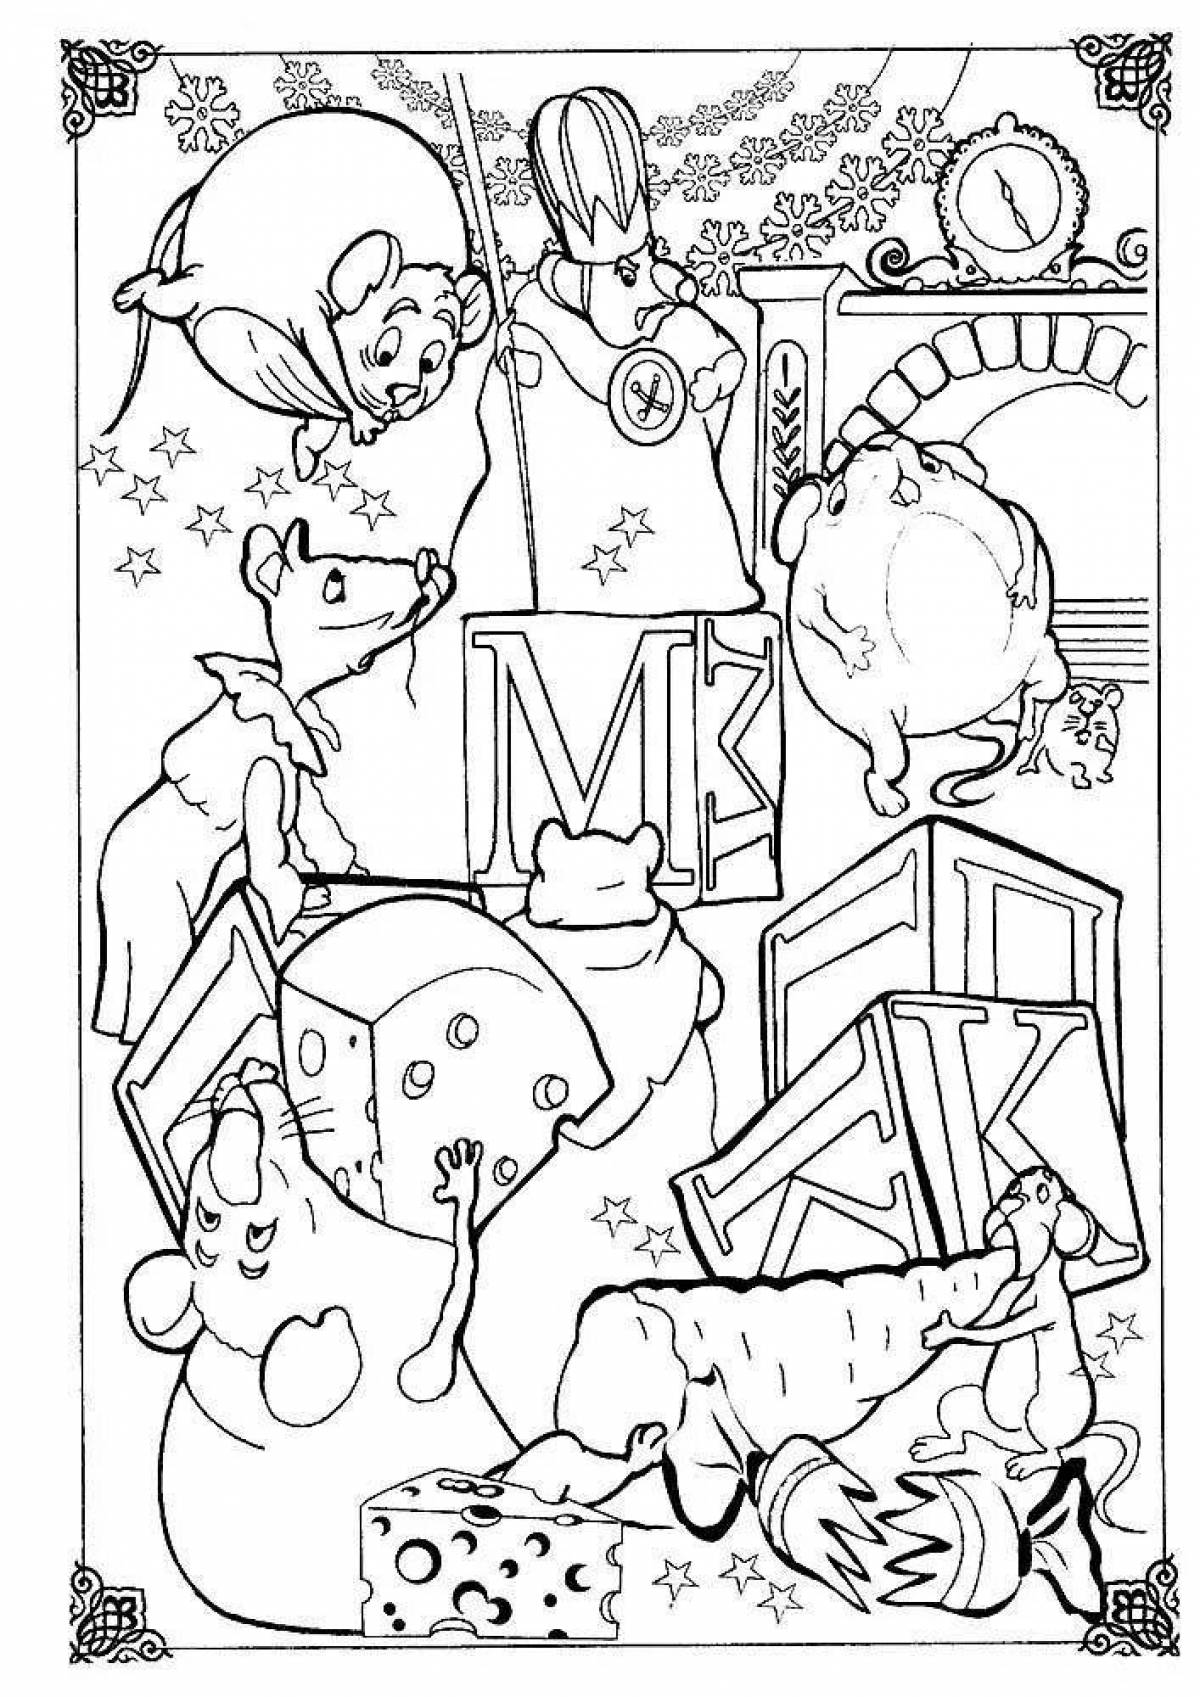 Playful mouse king coloring page